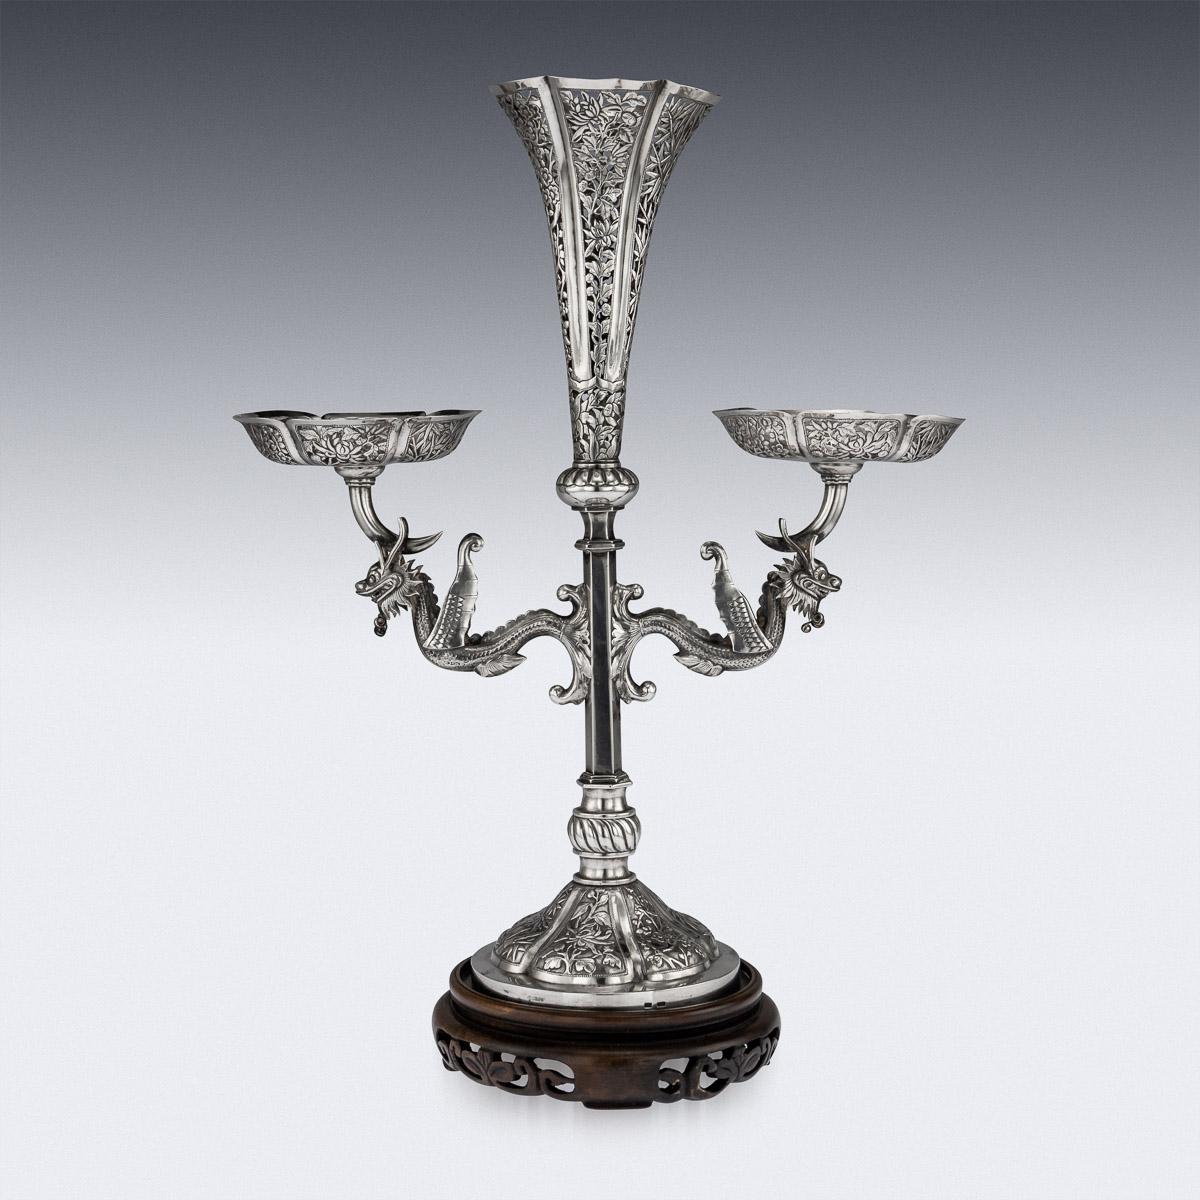 Antique late-19th century Chinese very unusual solid silver eperne, the central trumpet shaped vase and twin baskets are highly decorated with pierced bamboo leaves, cherry blossom and chrysanthemums flowers. The stem applied with finely modelled